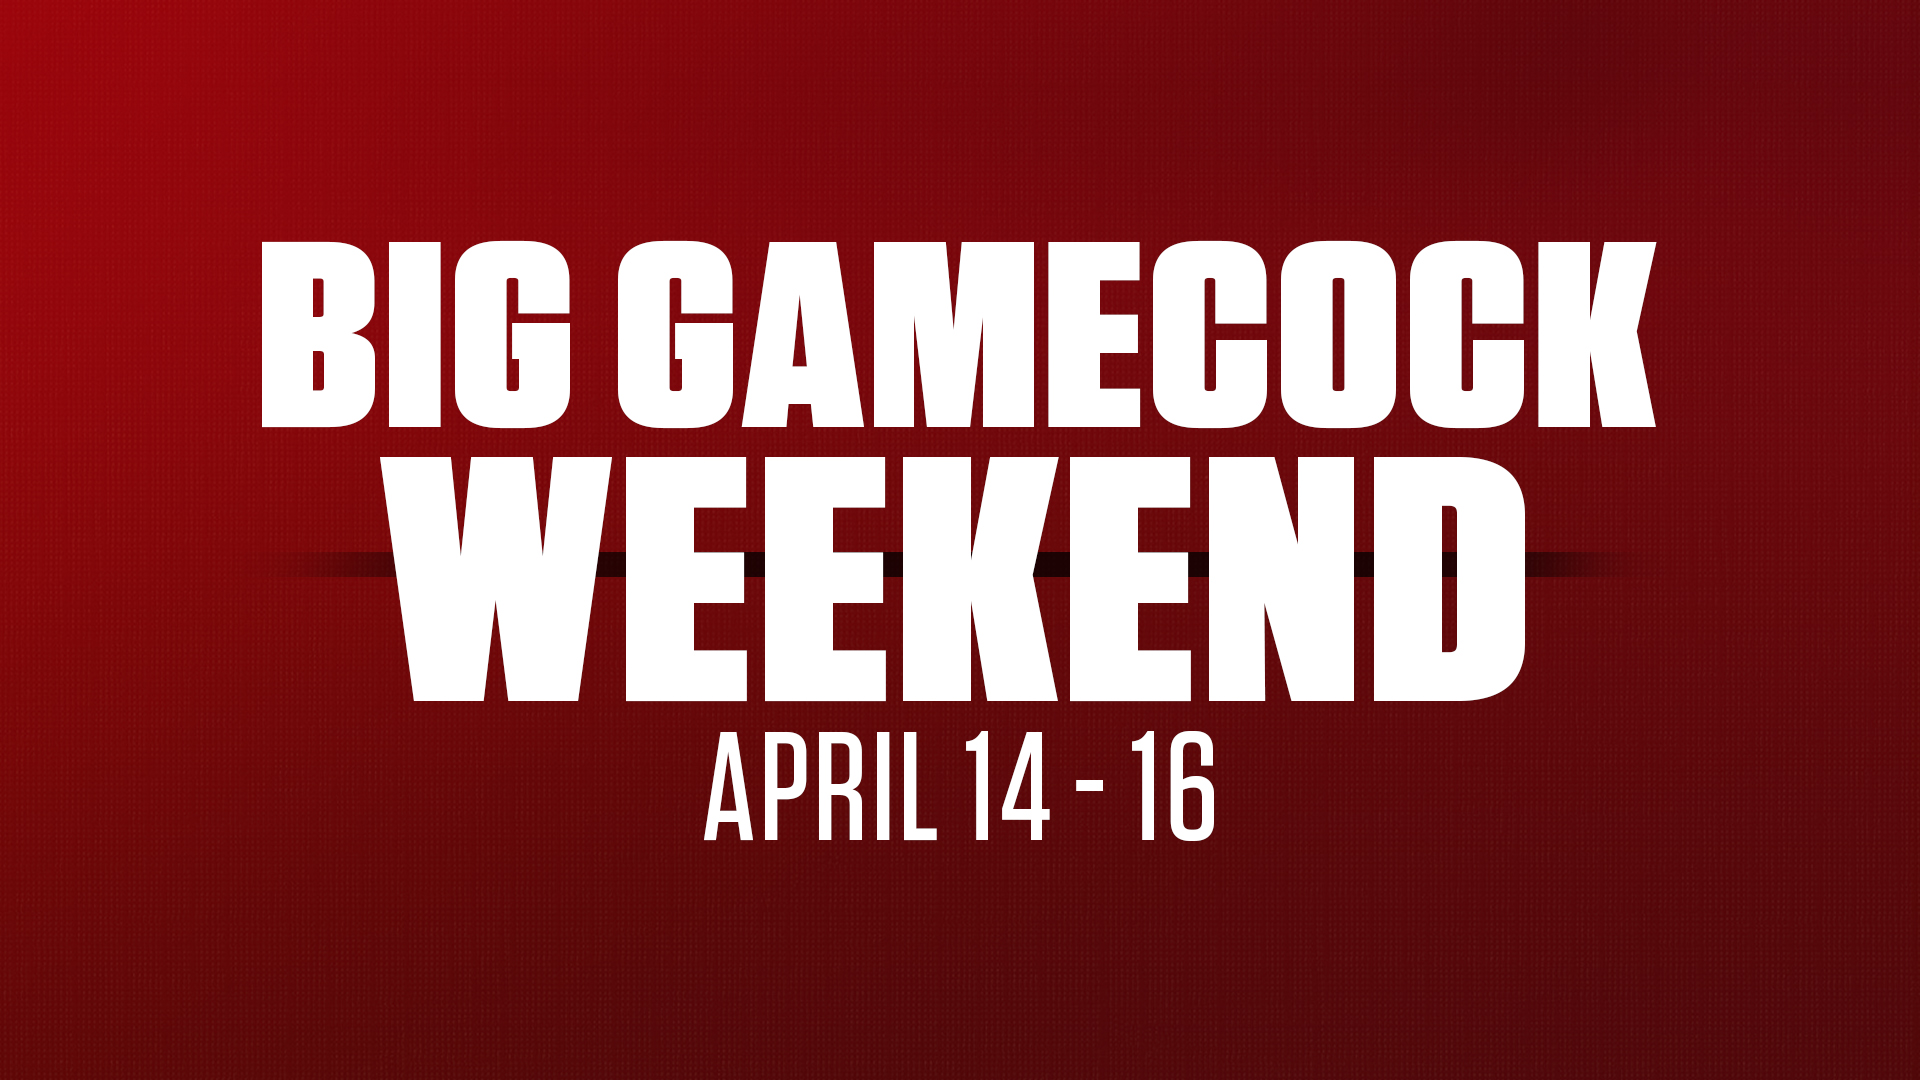 Final details announced for Big Gamecock Weekend